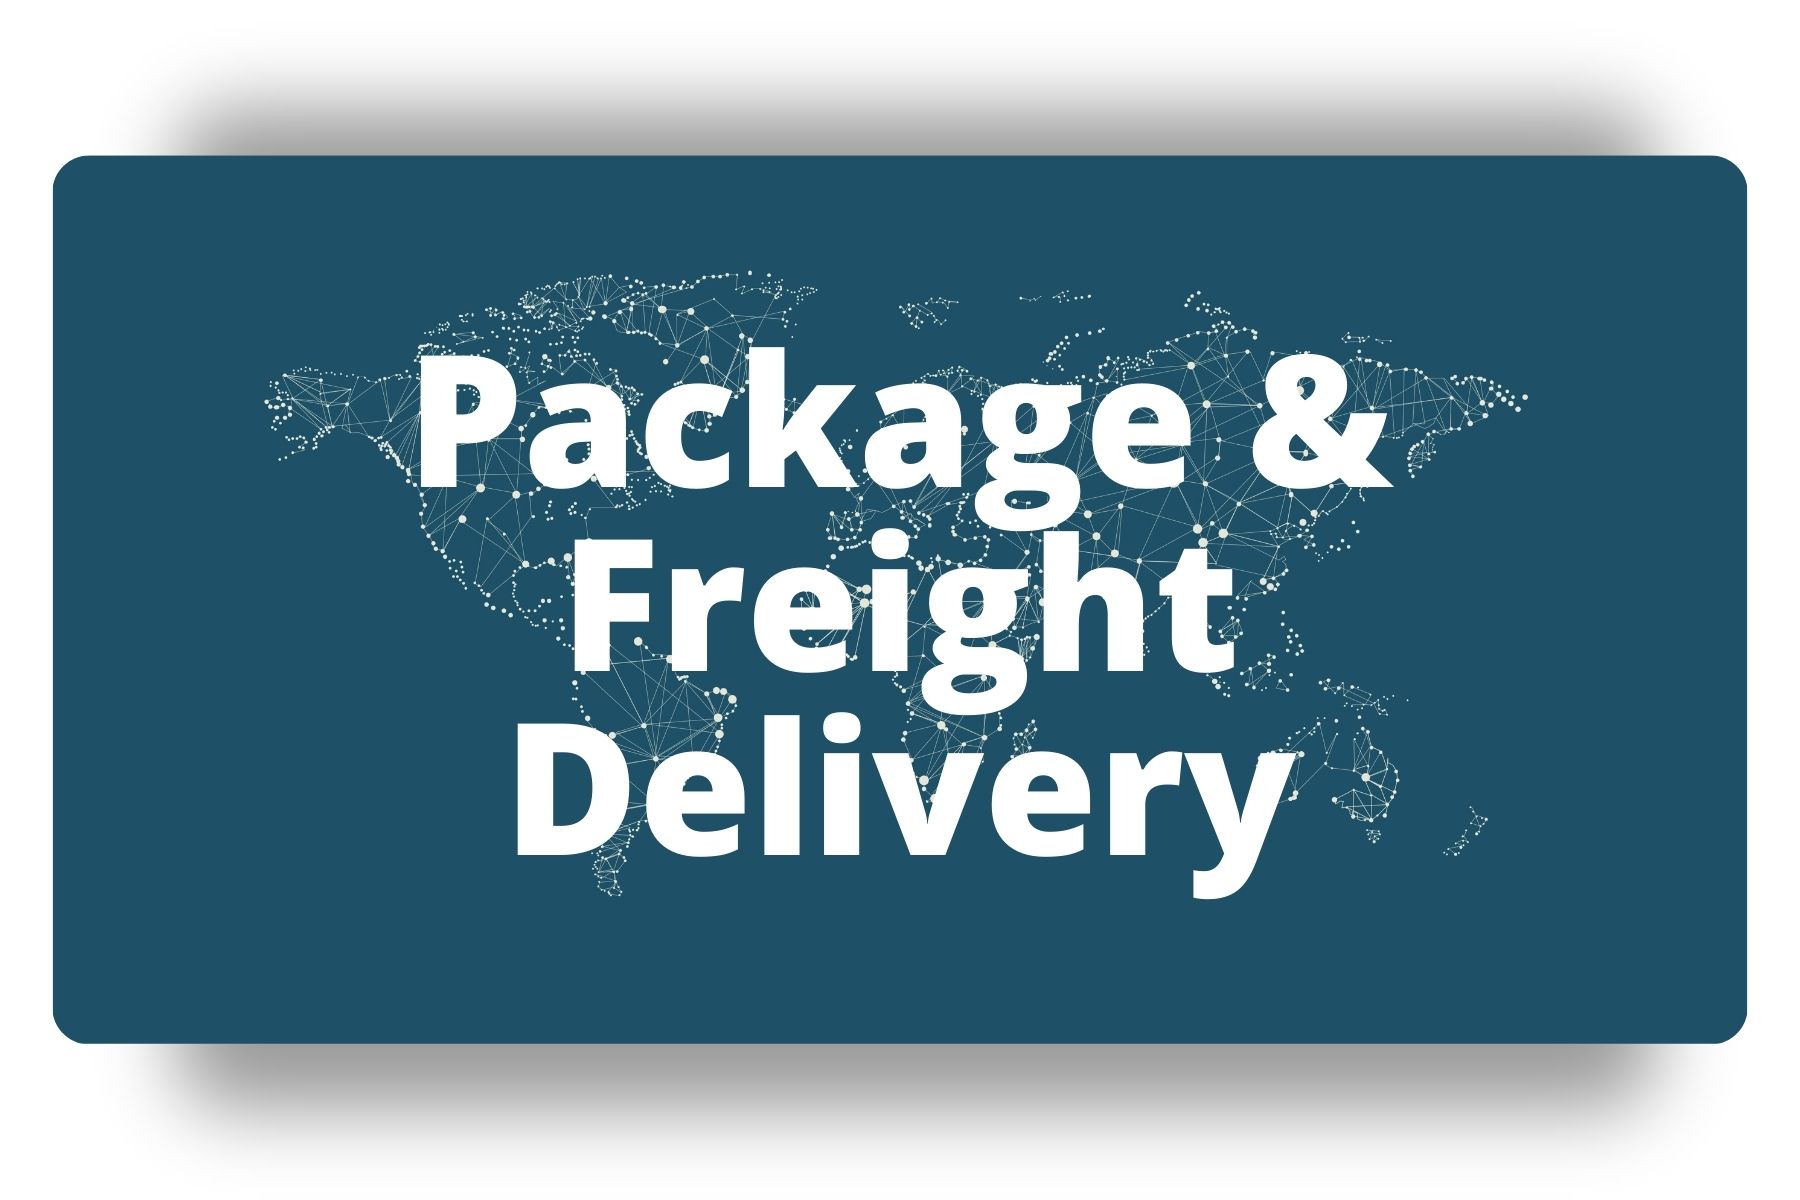 DSMN8's Package & Freight Delivery Leaderboard Hub Image